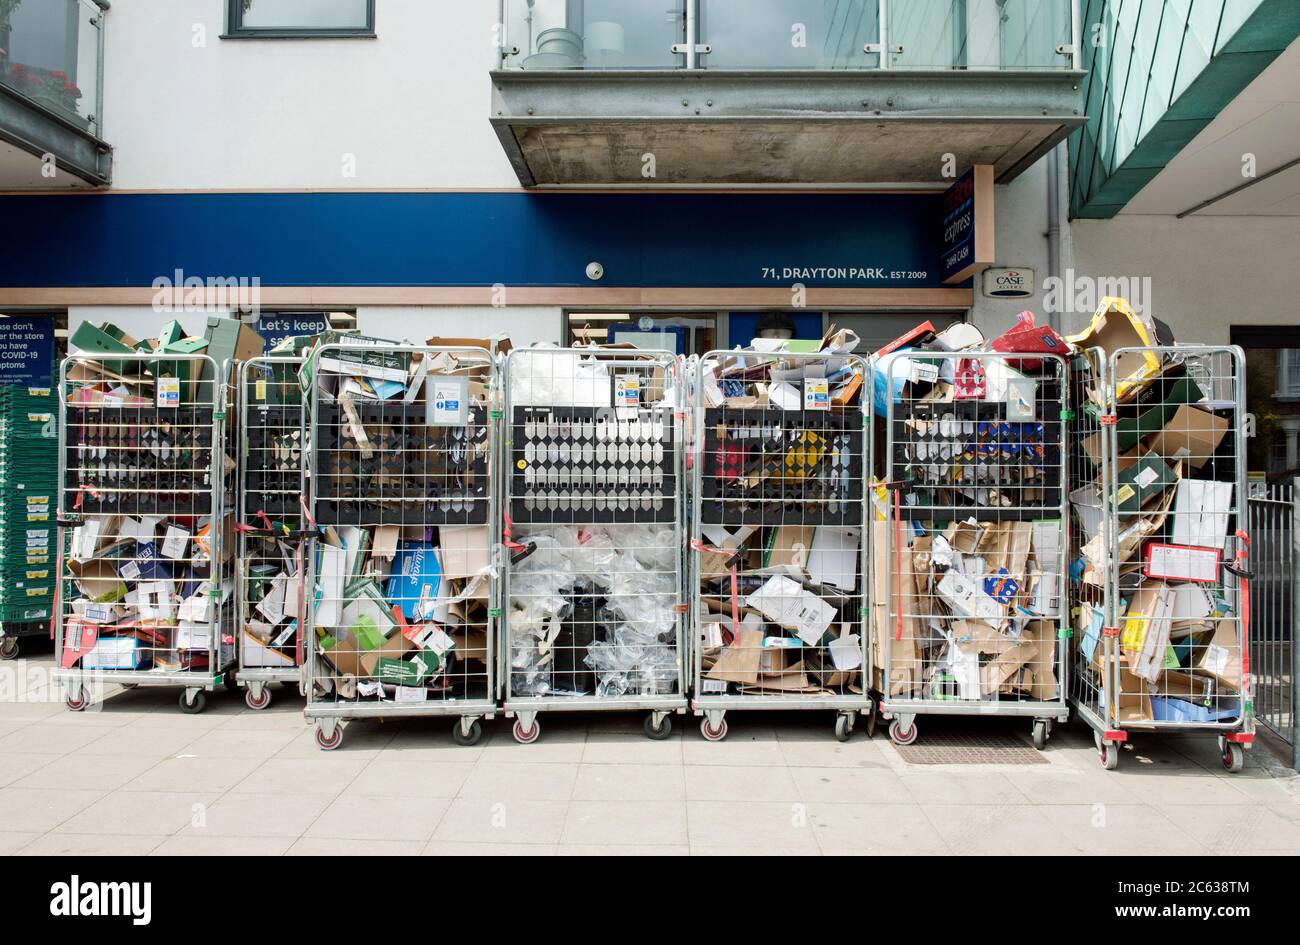 Recyclable Cardboard boxes in roll cages or wire trollies outside supermarket waiting to be collected for recycling Drayton Park Highbury Islington Stock Photo